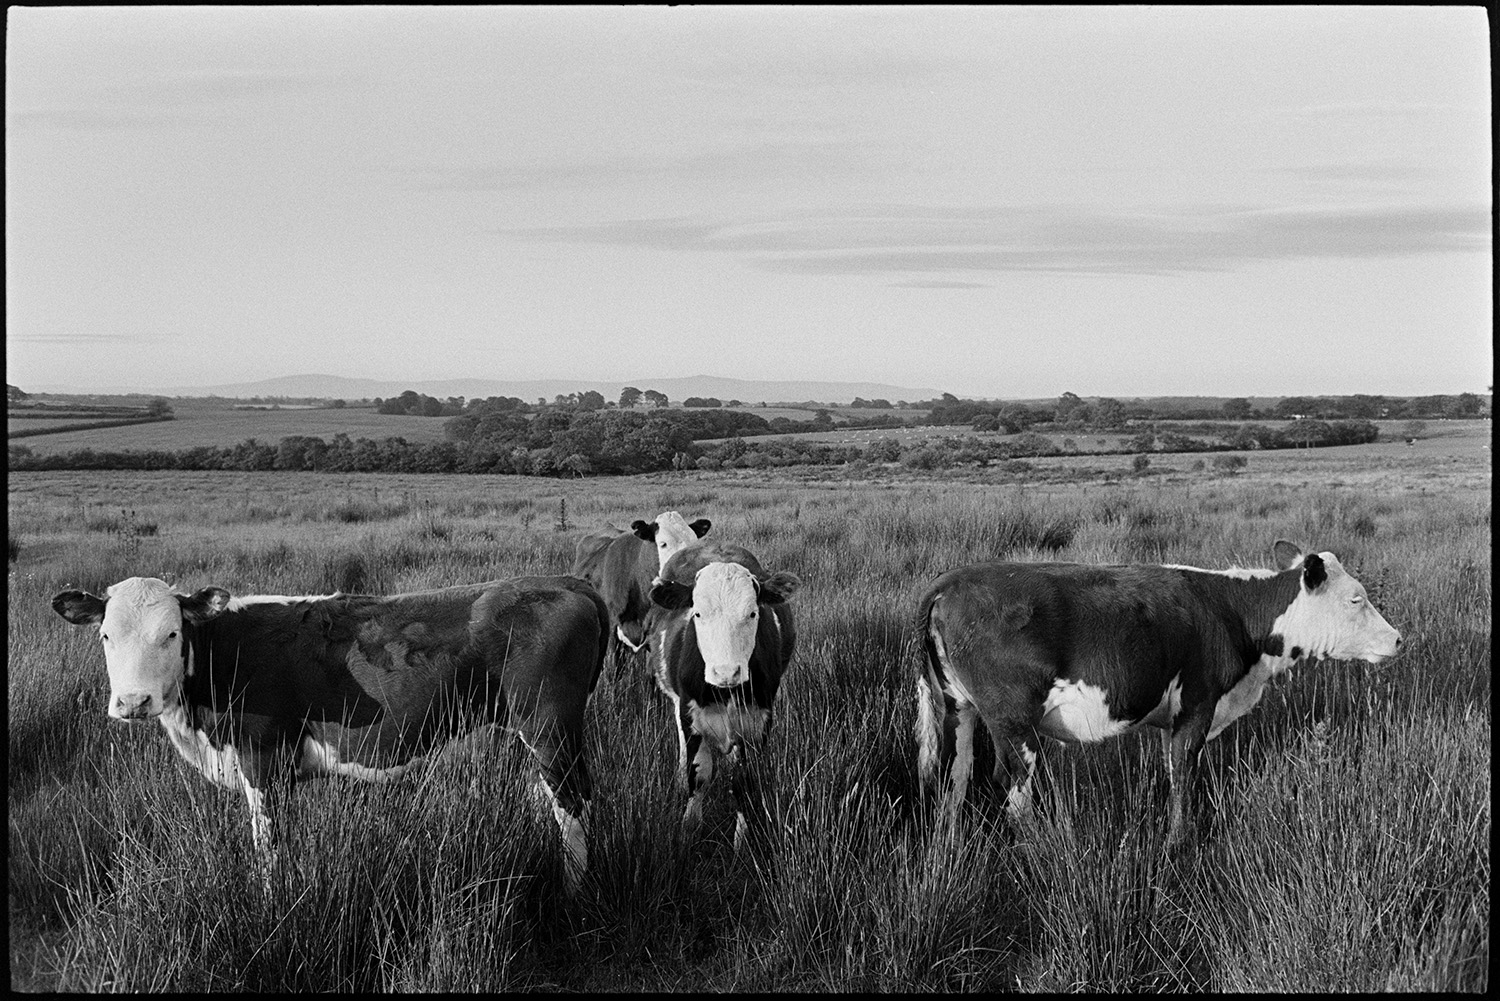 Cattle on moor.
[Cattle standing amongst rushes in a field on Hollocombe Moor. Distant views of fields, hills and moorland are visible in the background.]